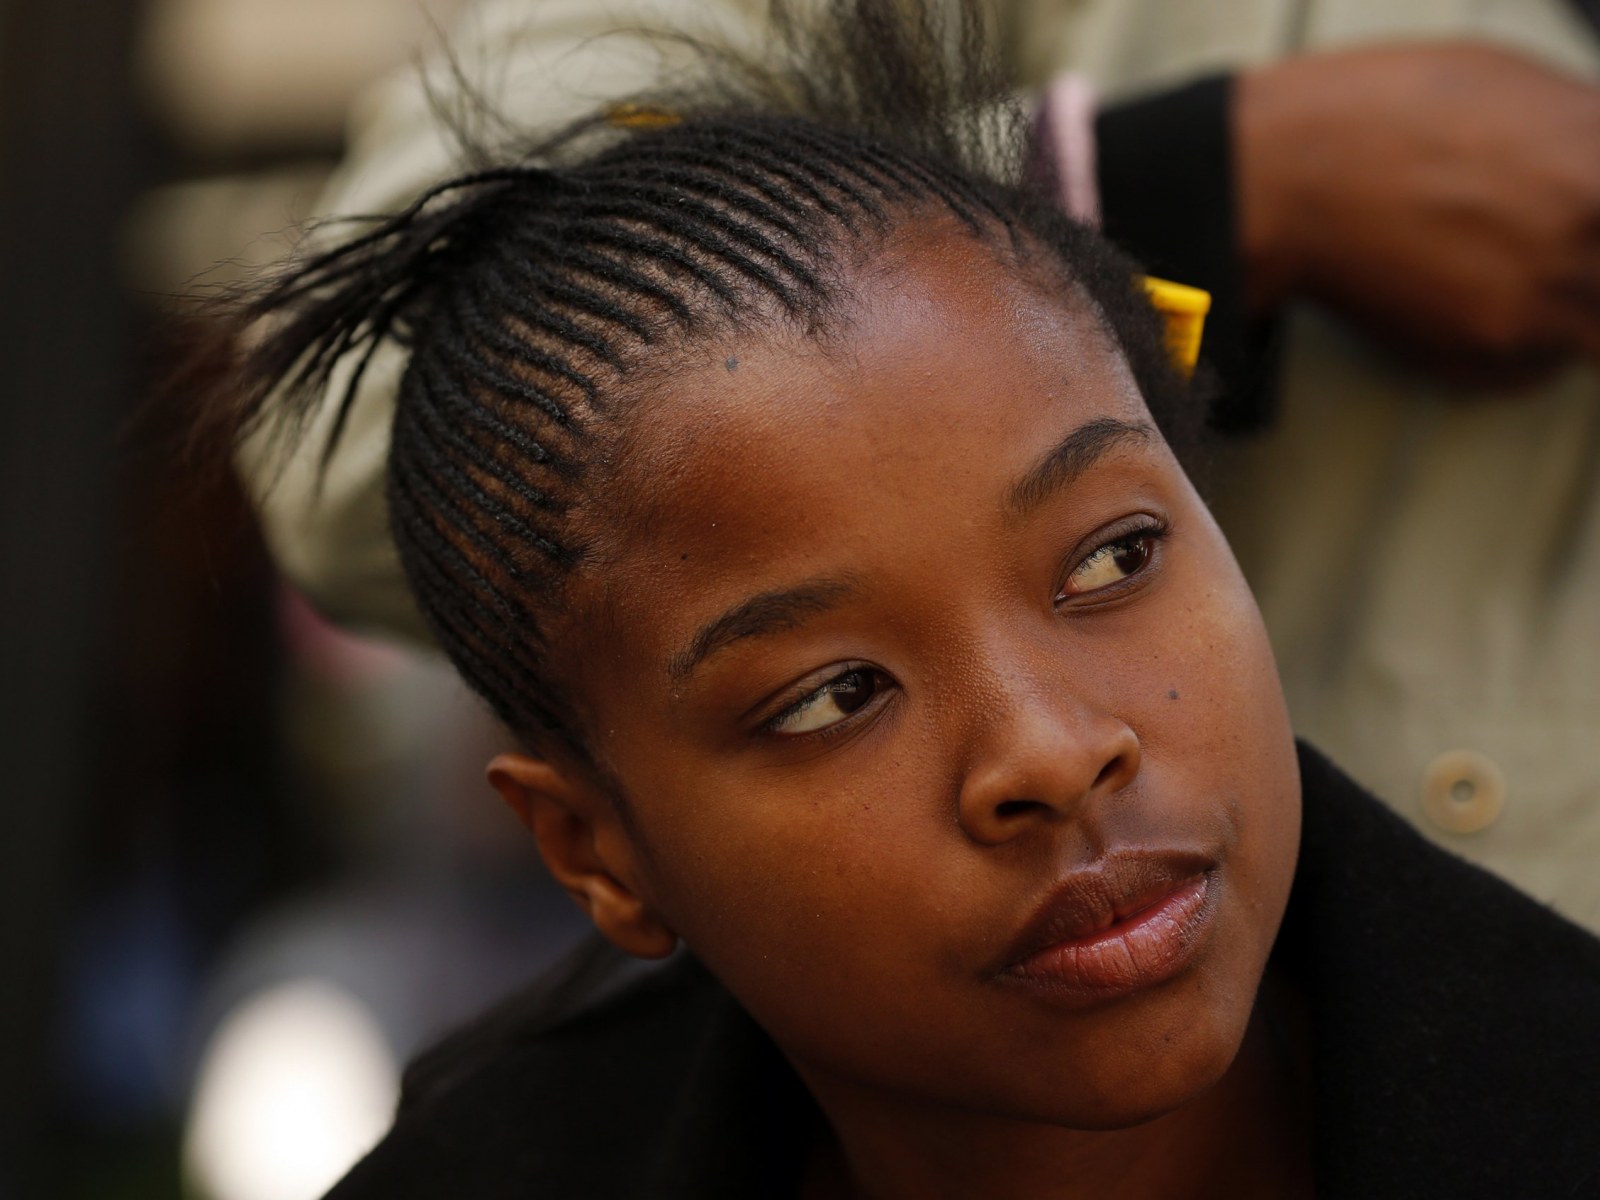 The War on Black Hair in South Africa's Schools: Girls Sent Home for Braids  as Racism Row Ignites